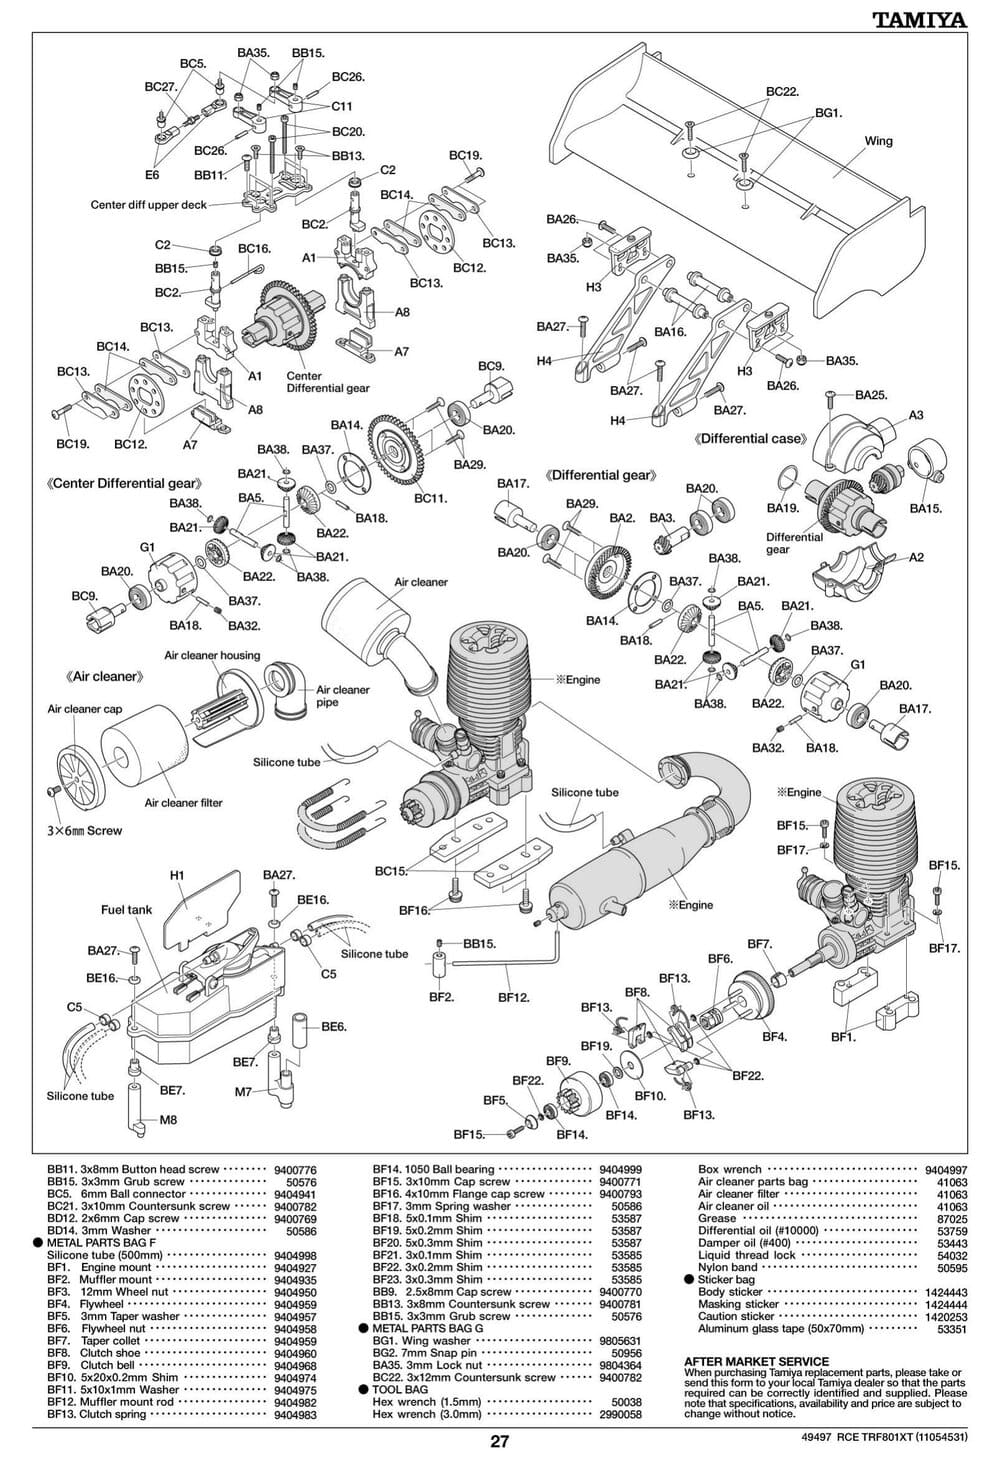 Tamiya - TRF801Xt Performance Package Version Chassis - Manual - Page 27